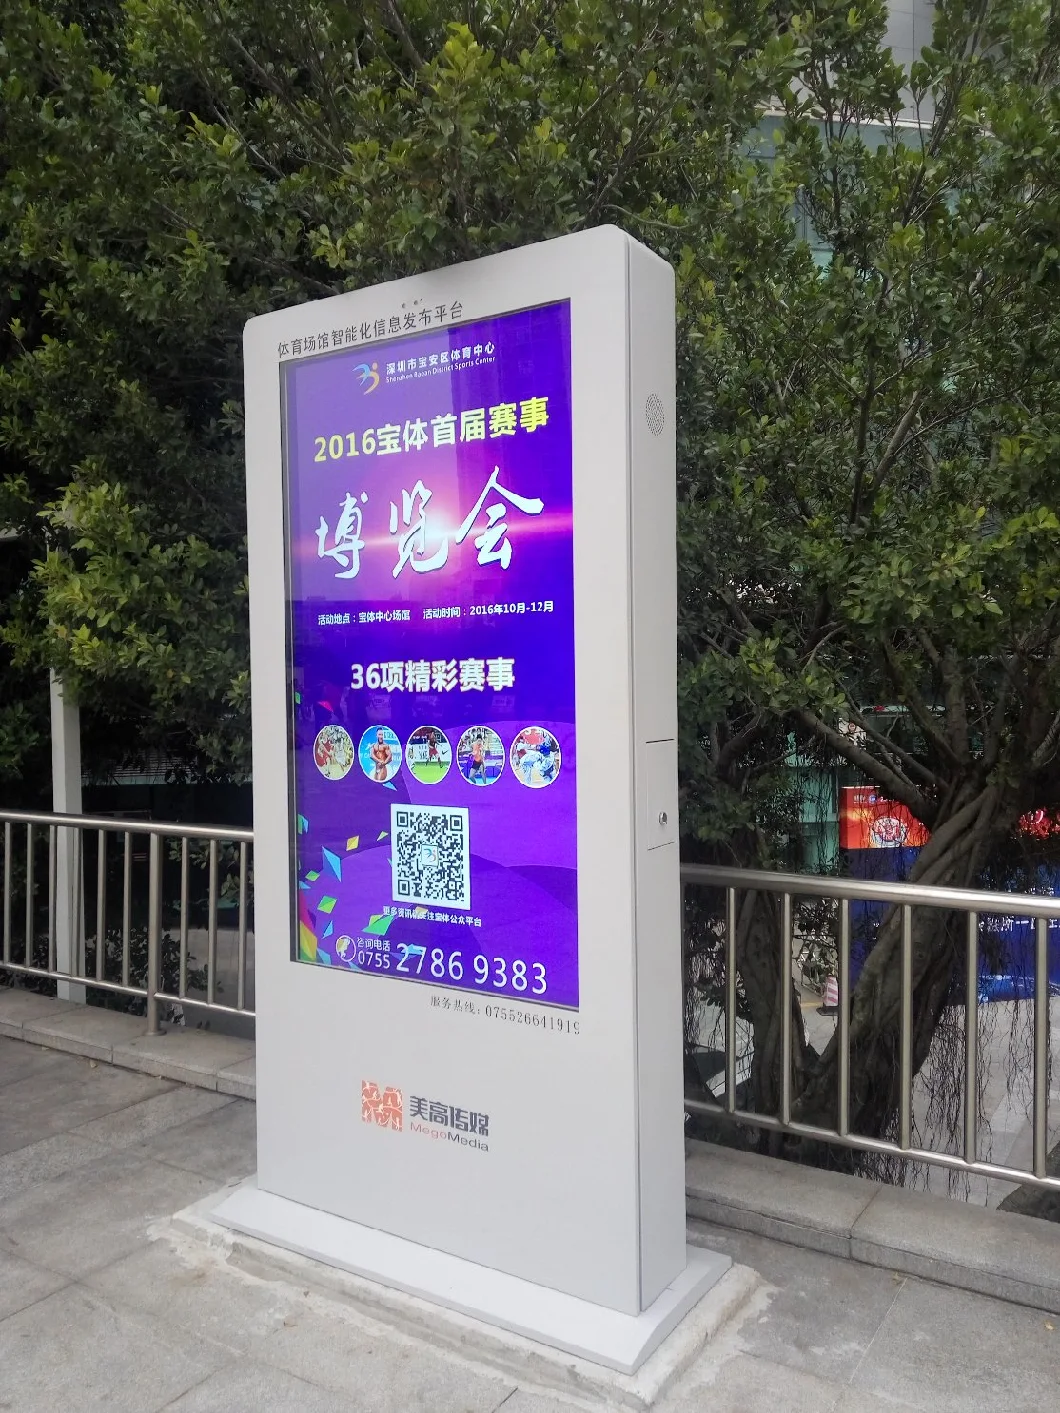 43inch 55 Inch 65 Inch Floor Standing LCD Totam Digital Signage for Outdoor Advertising Use